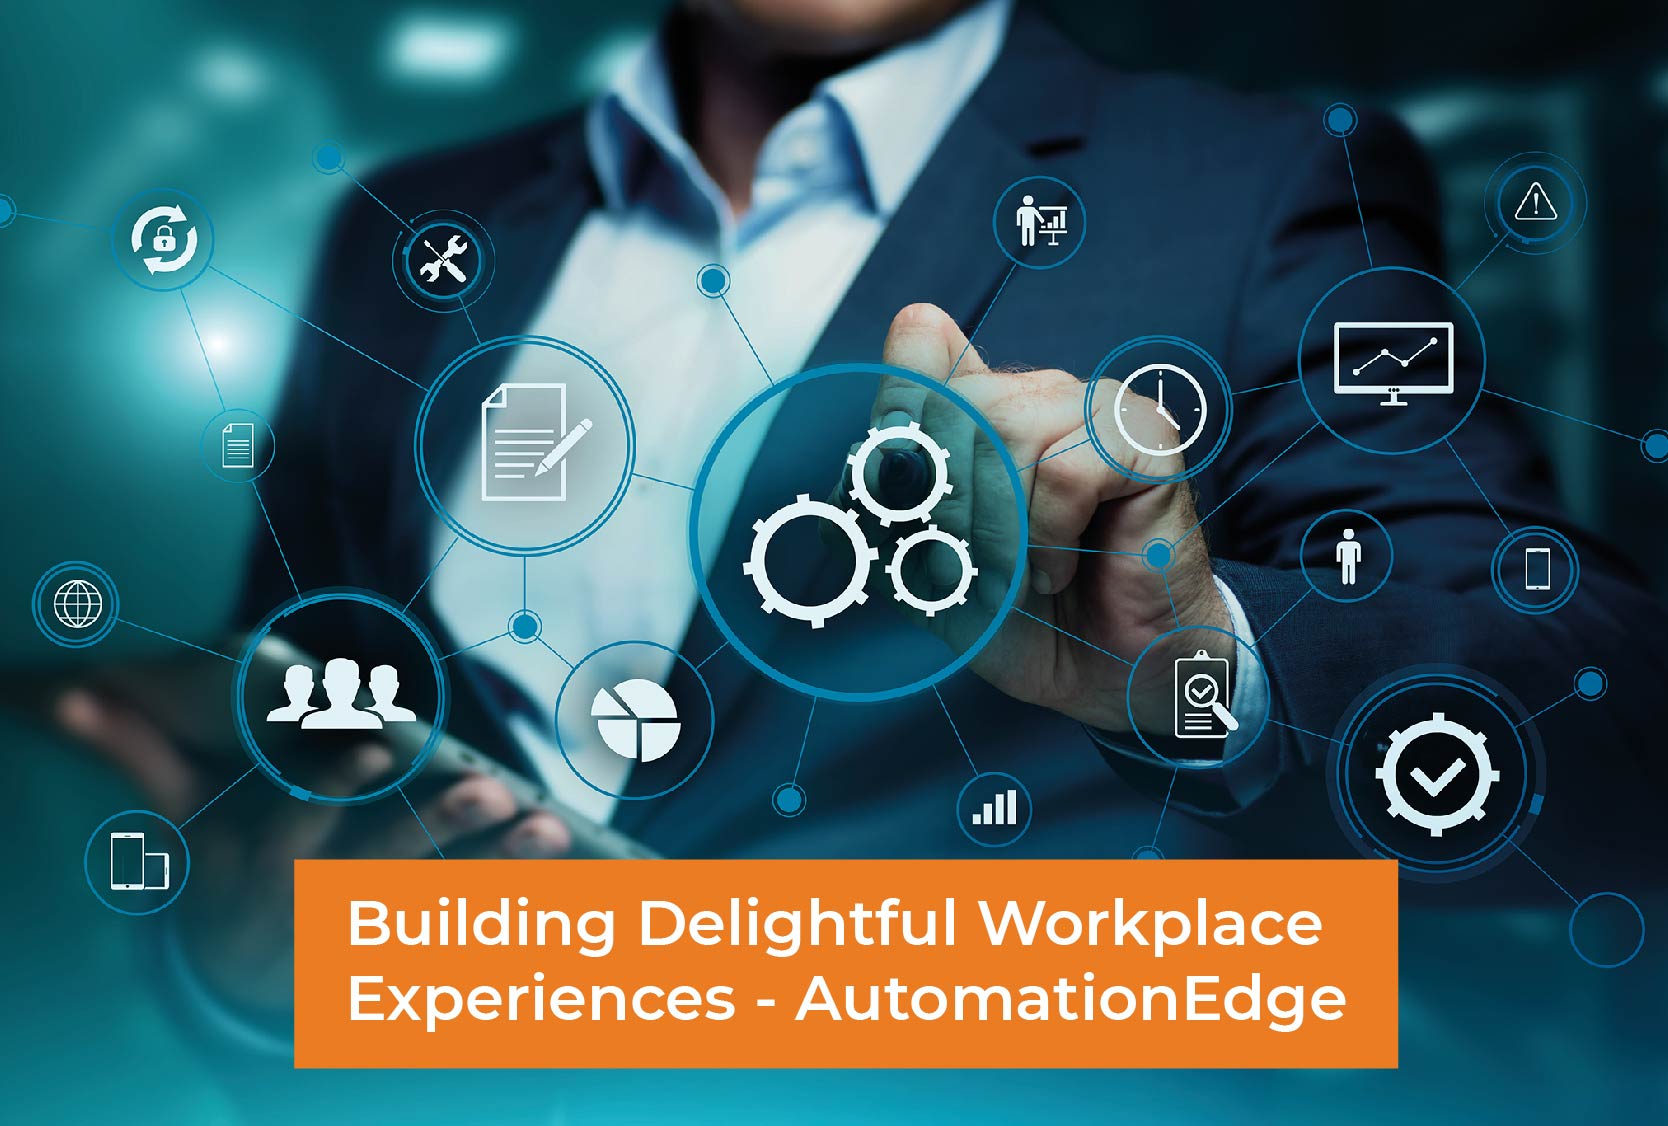 Building Delightful Workplace Experiences - AutomationEdge